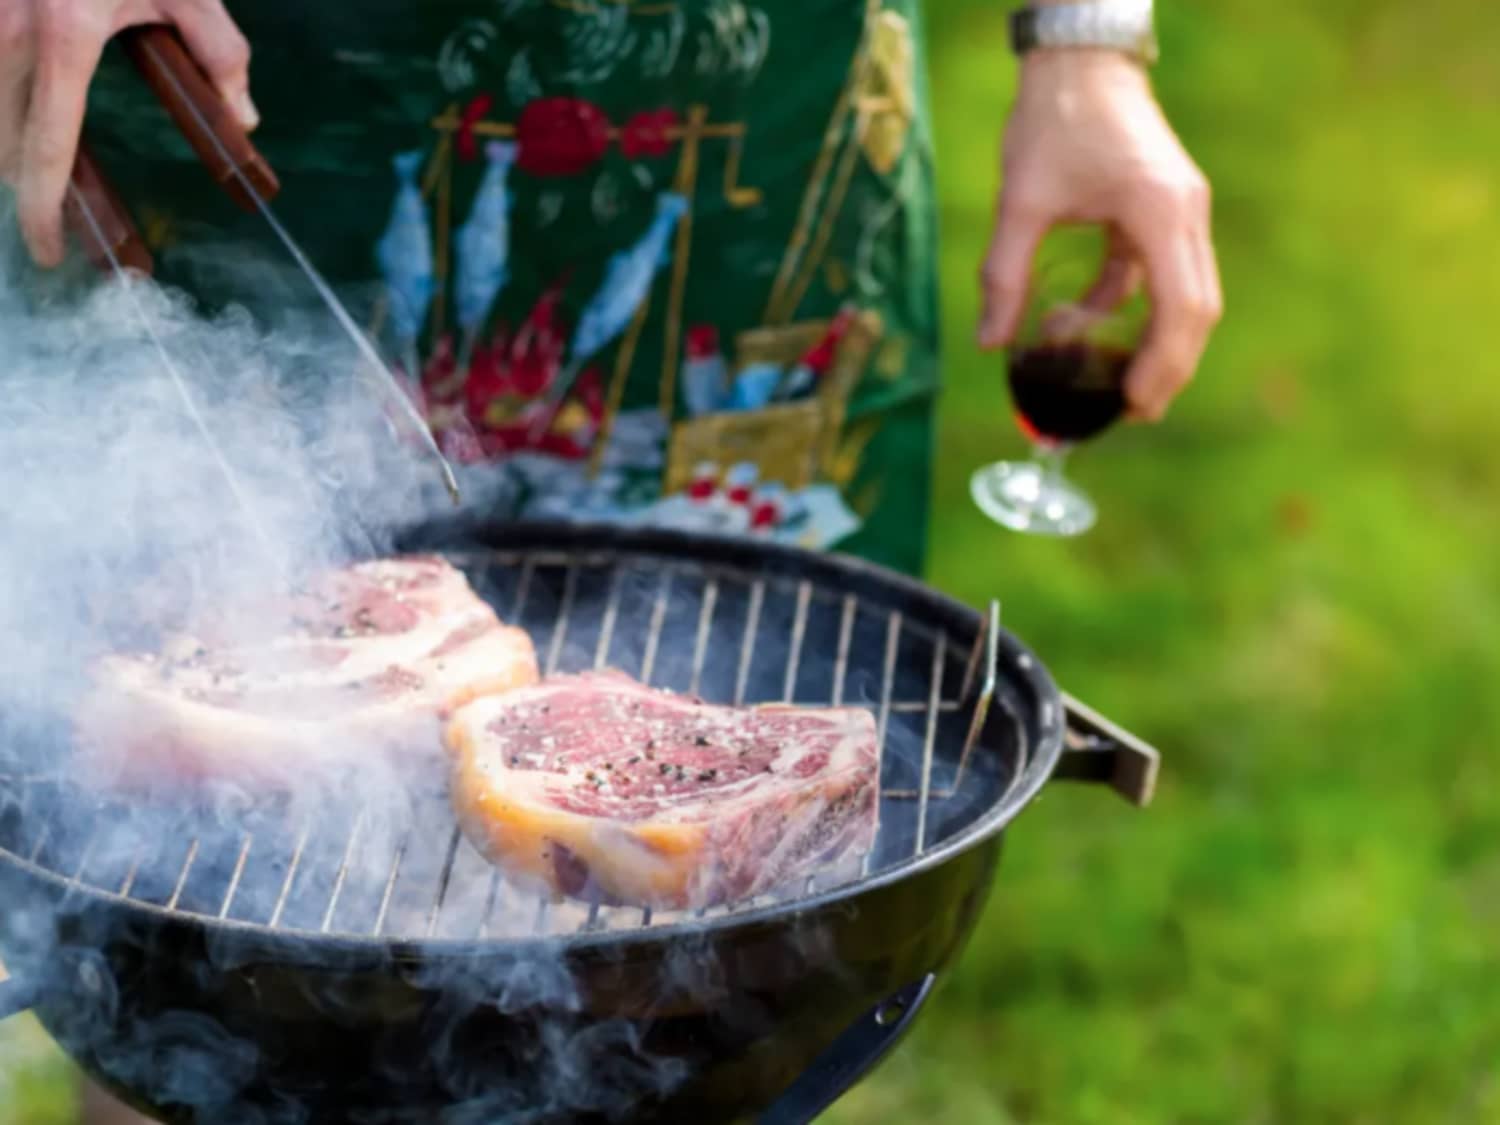 Why You Should Rethink Using Aluminum Foil This Grilling Season